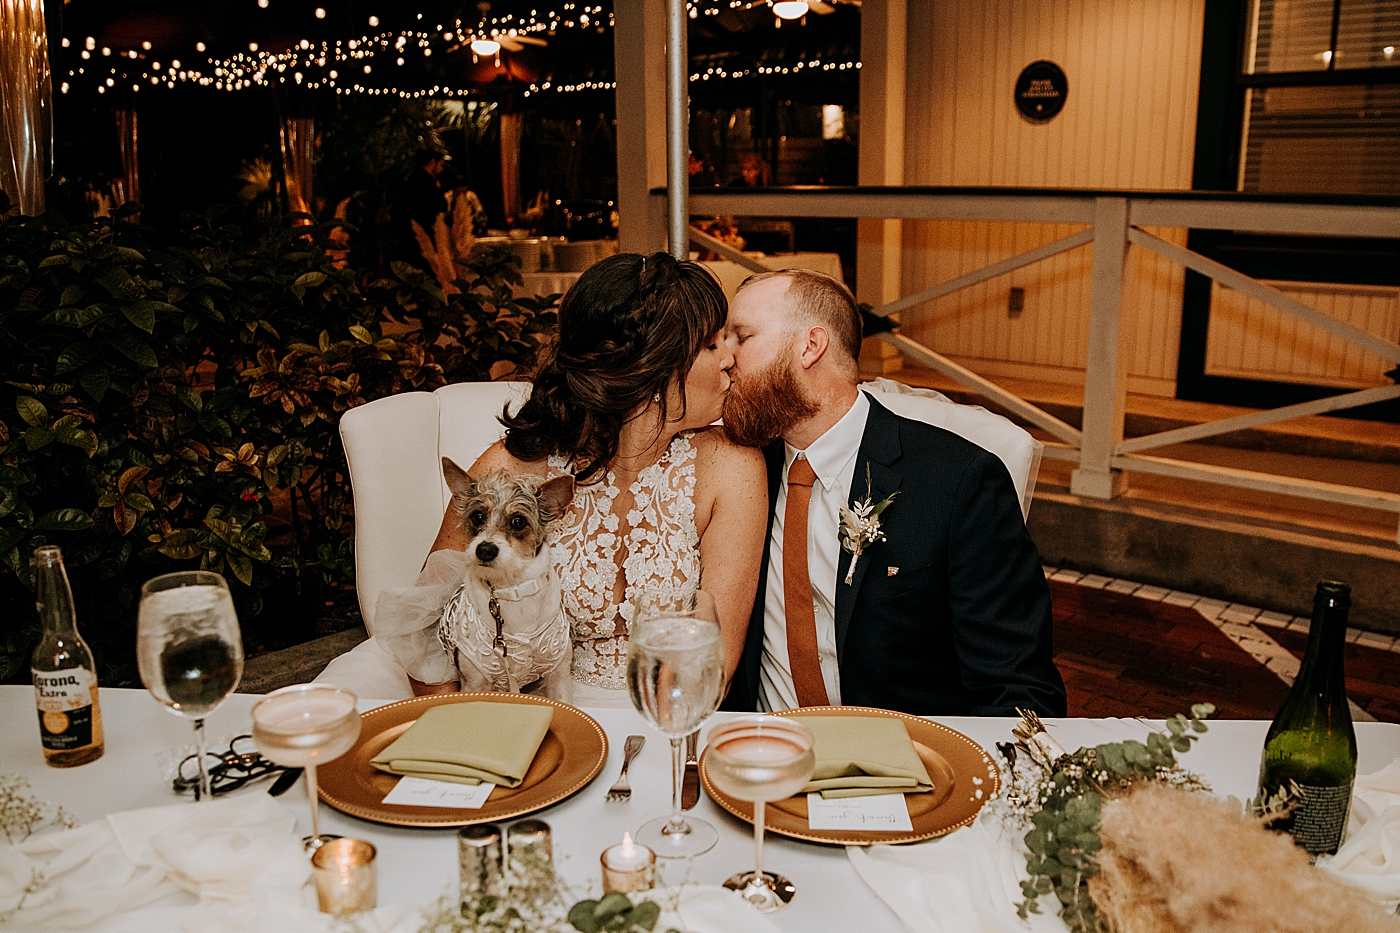 Bride and Groom kissing at sweetheart table with dog Historic Stranahan House Wedding Photography captured by South Florida Wedding Photographer Maggie Alvarez Photography